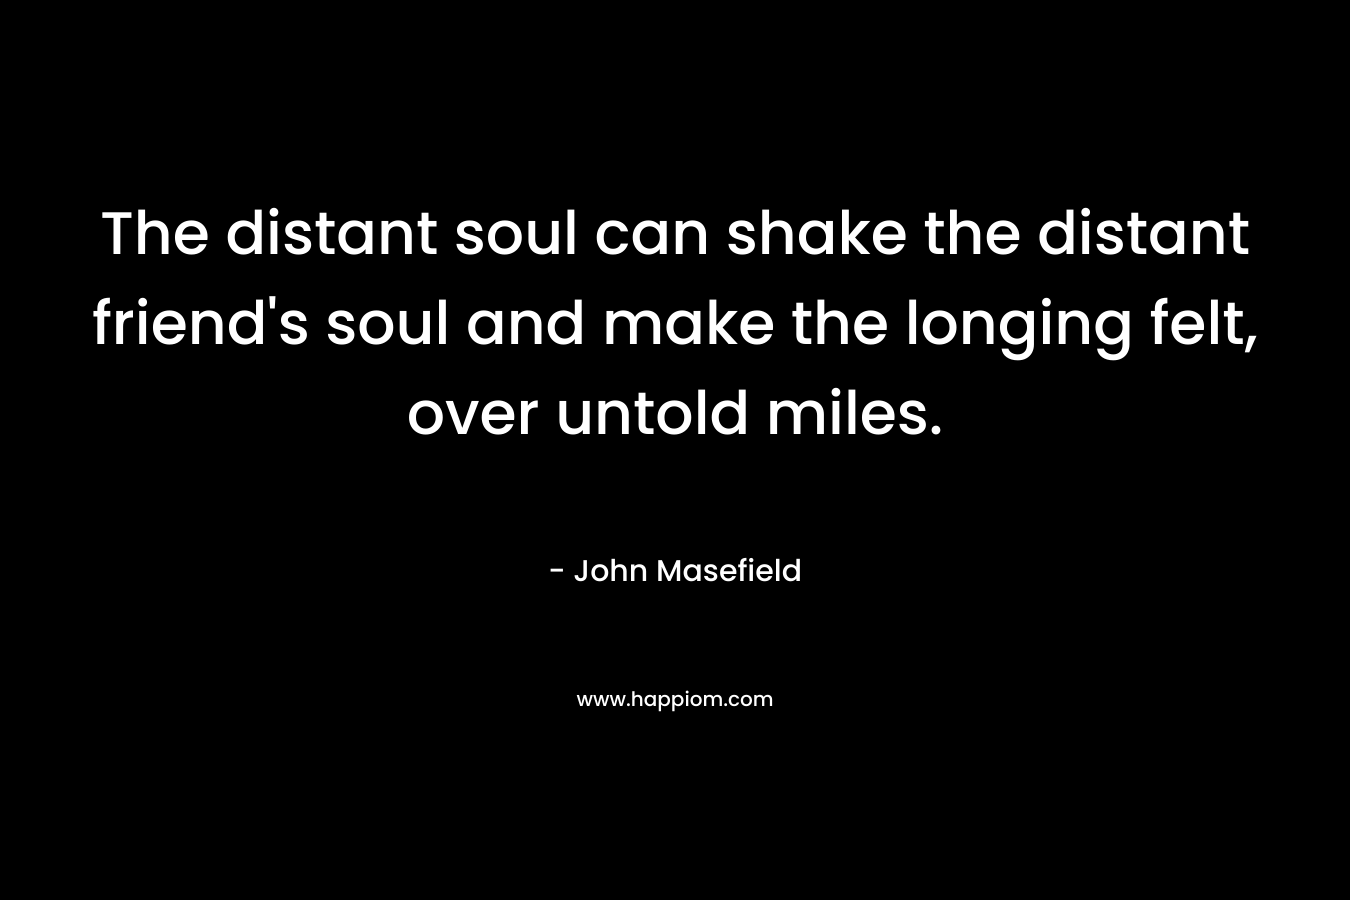 The distant soul can shake the distant friend's soul and make the longing felt, over untold miles.